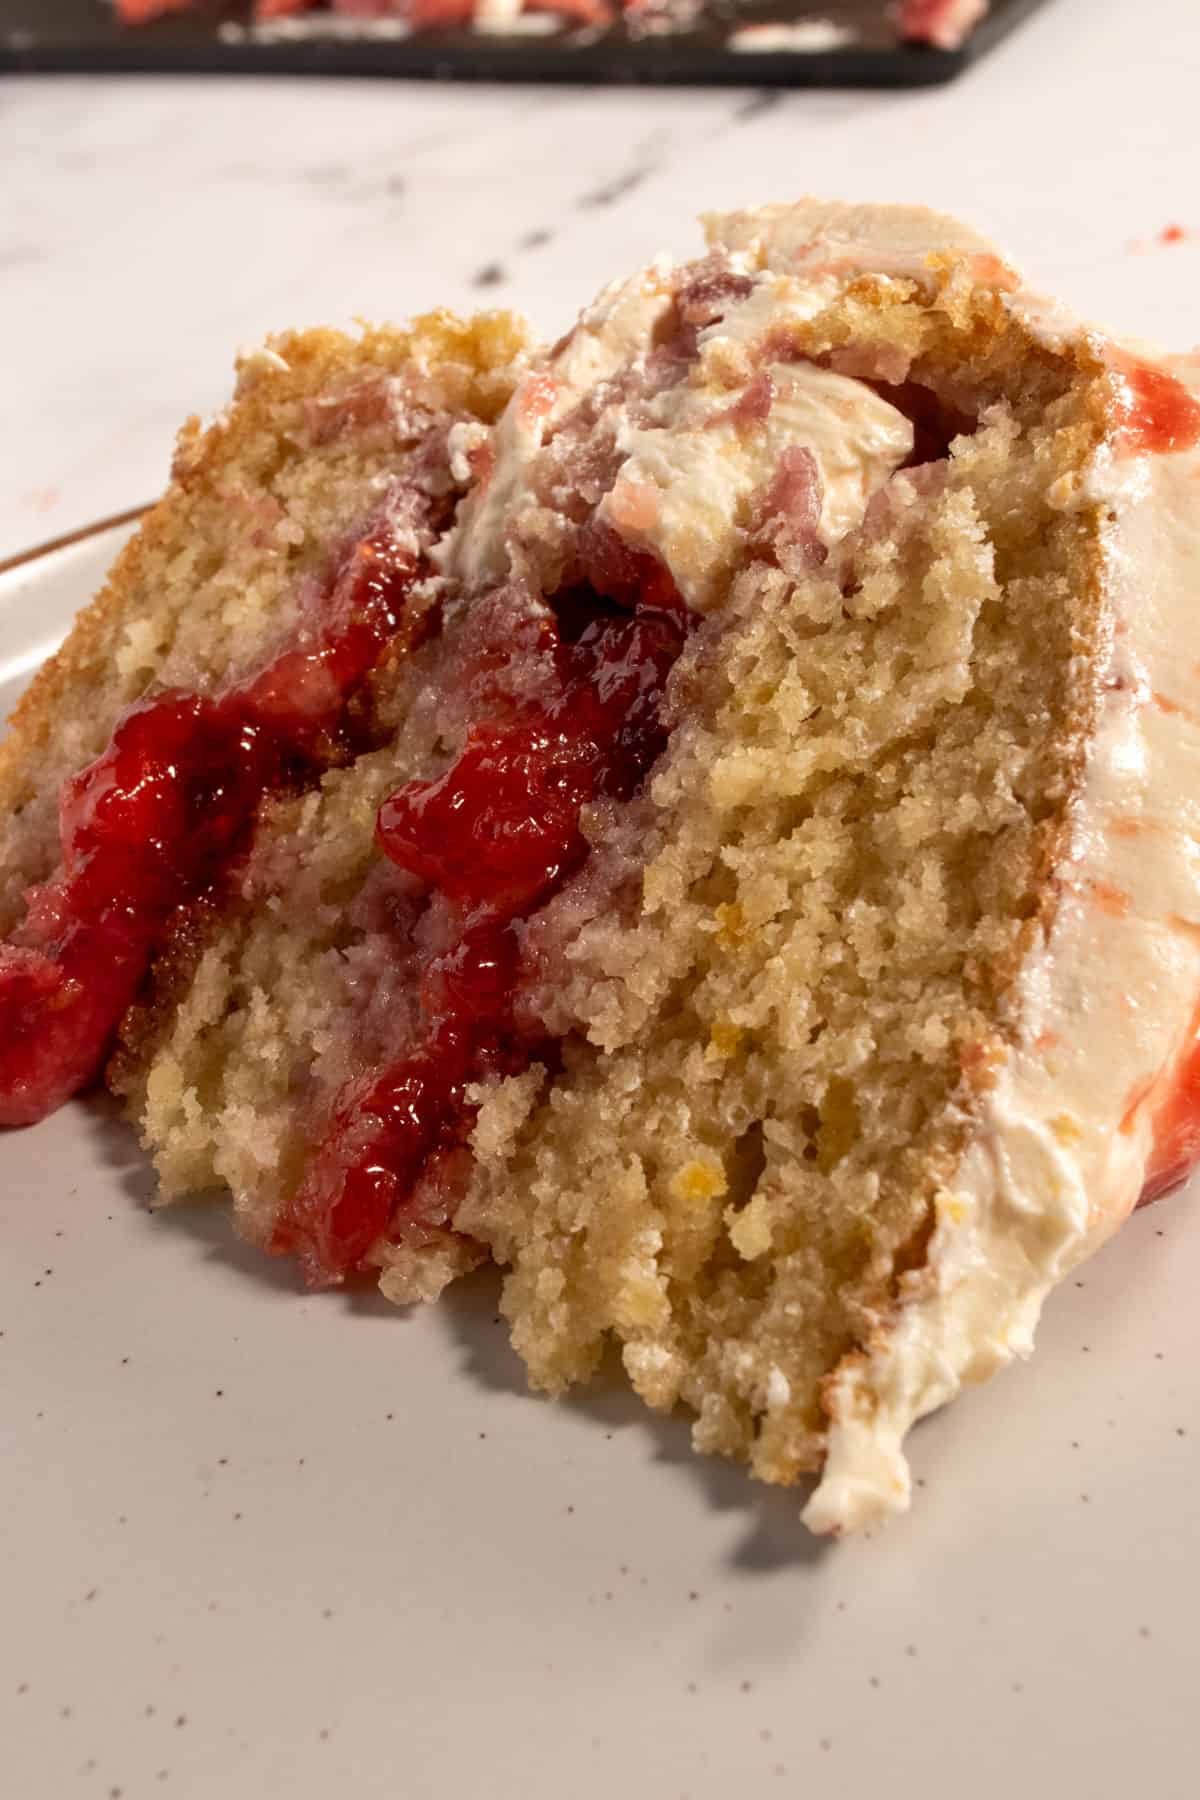 A large slice of vegan strawberry lemon cake on a white, brown-rimmed plate. There is lots of jam and frosting in the center.